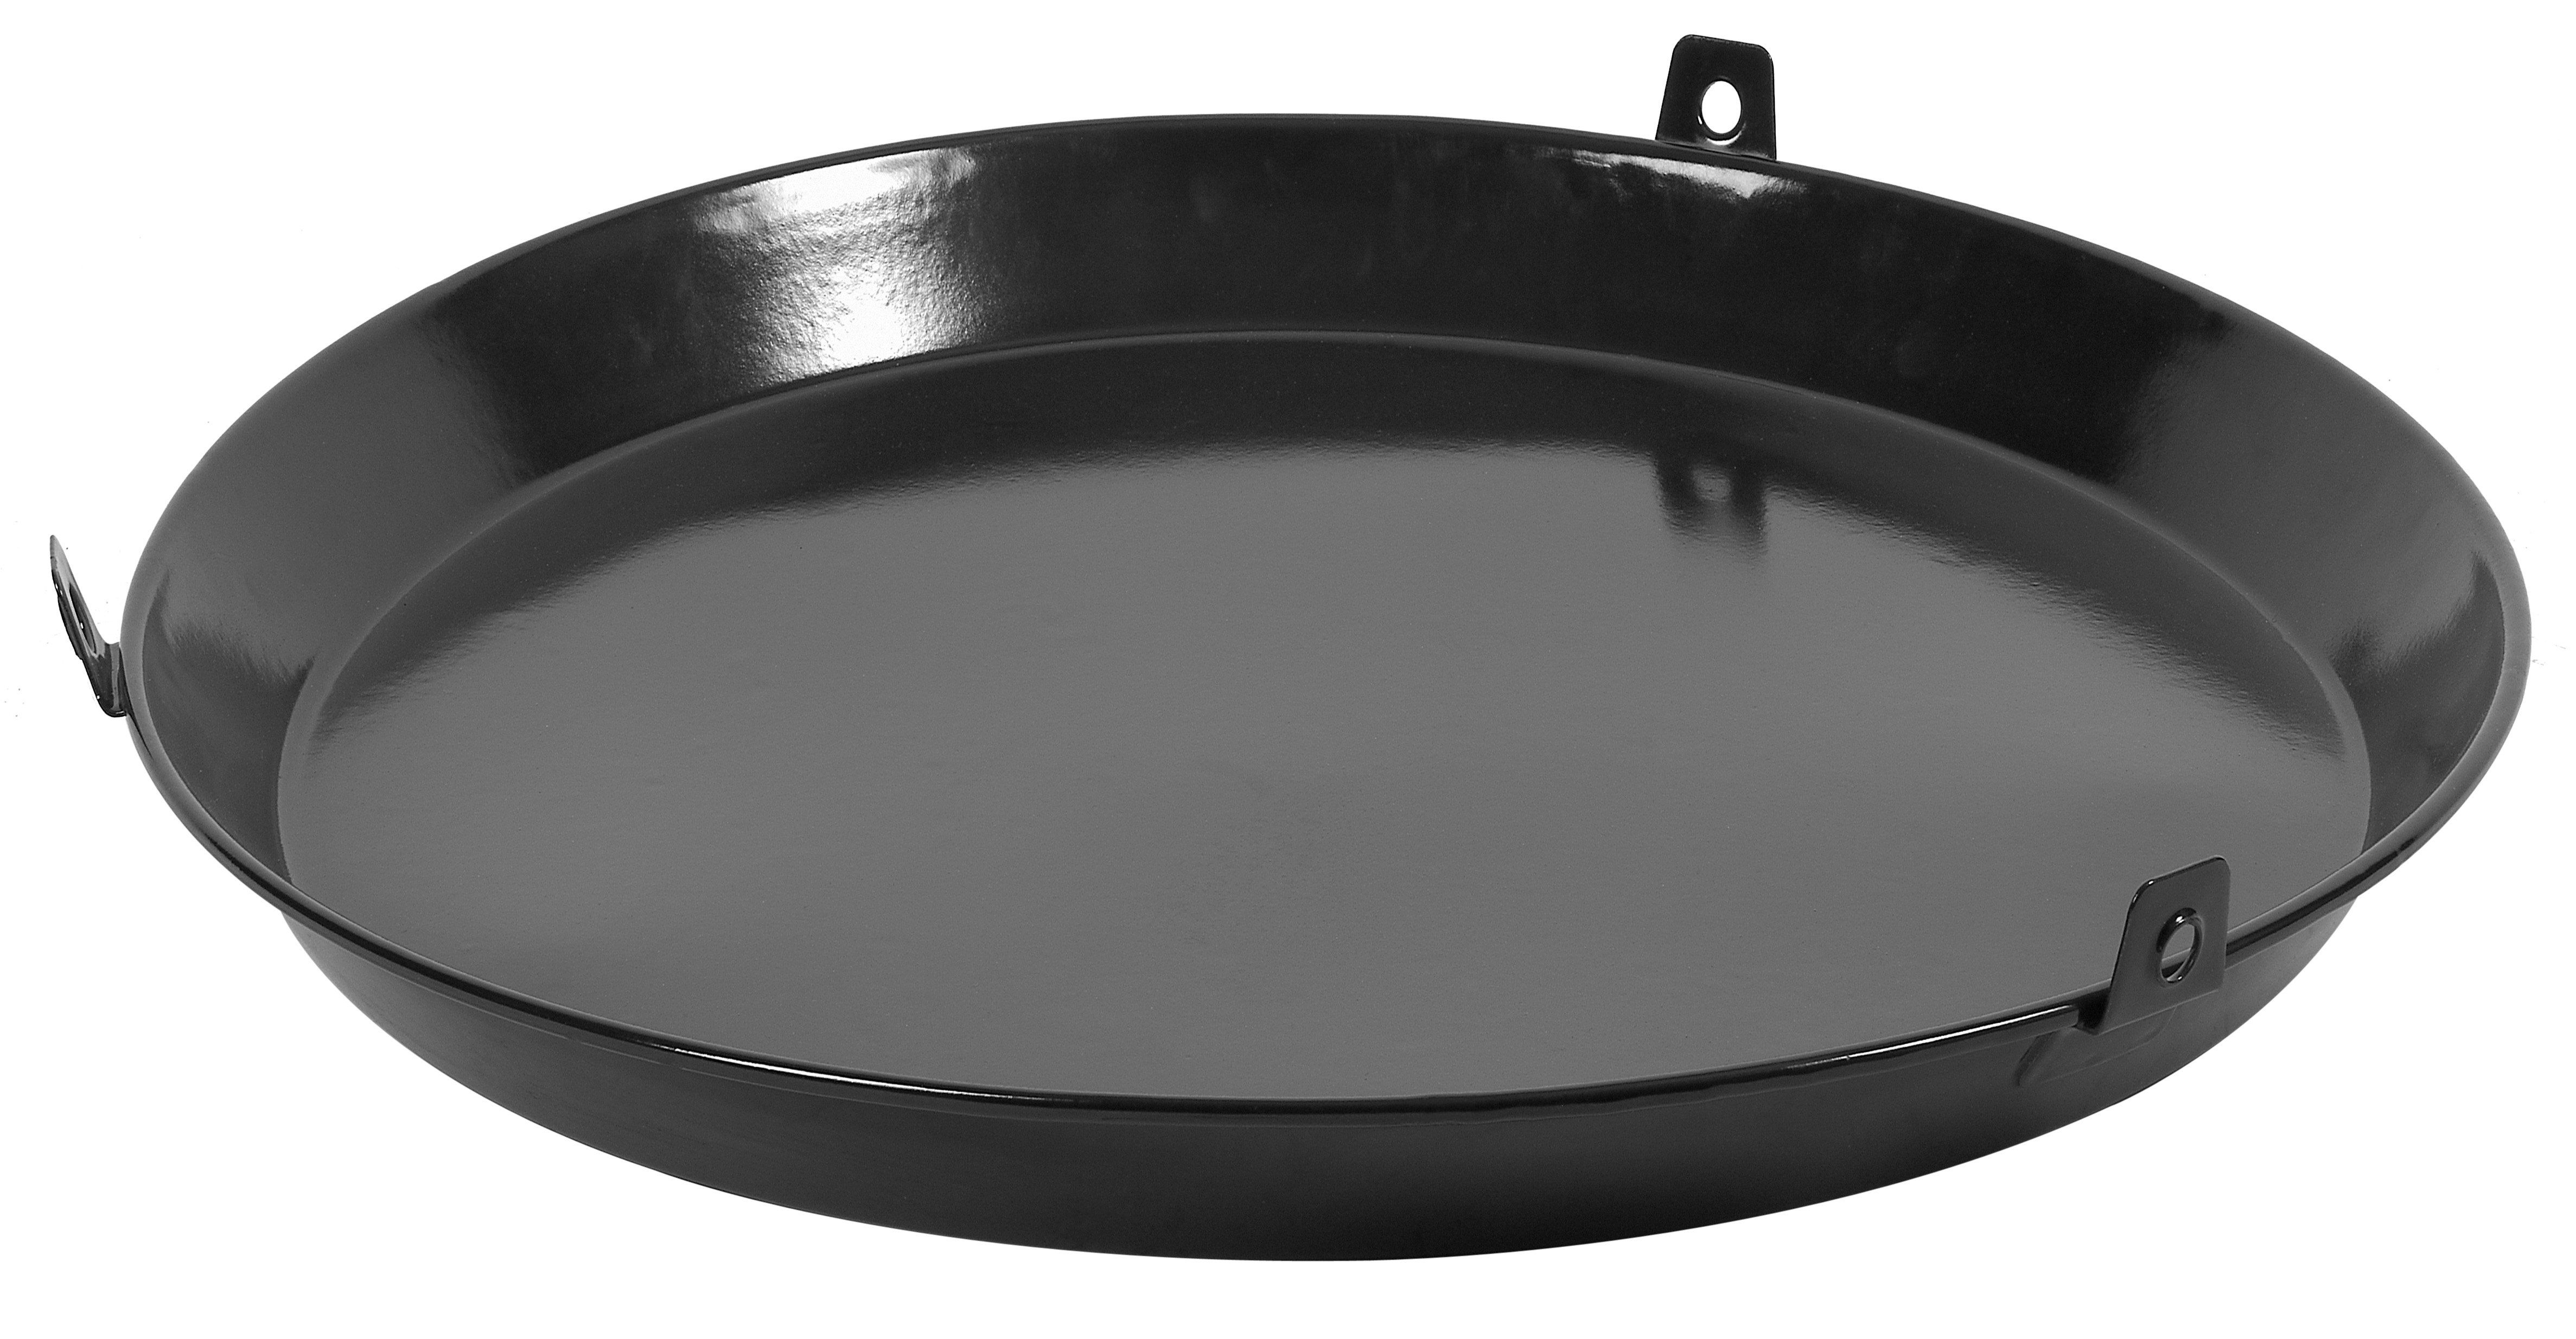 Barbecook Barbecue Pan